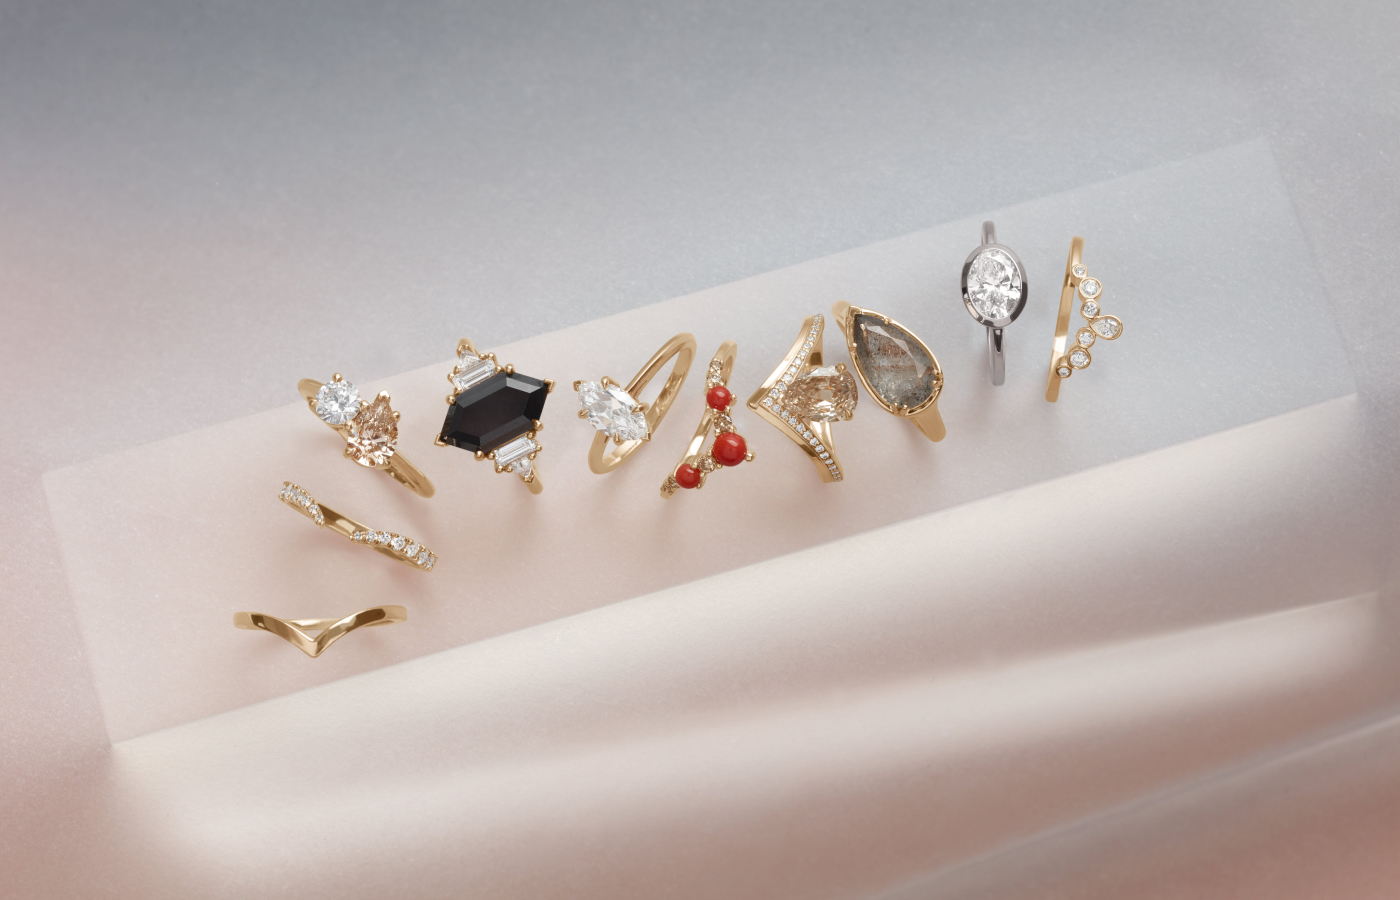 Selections of rings by jewellery designer Anna Sheffield